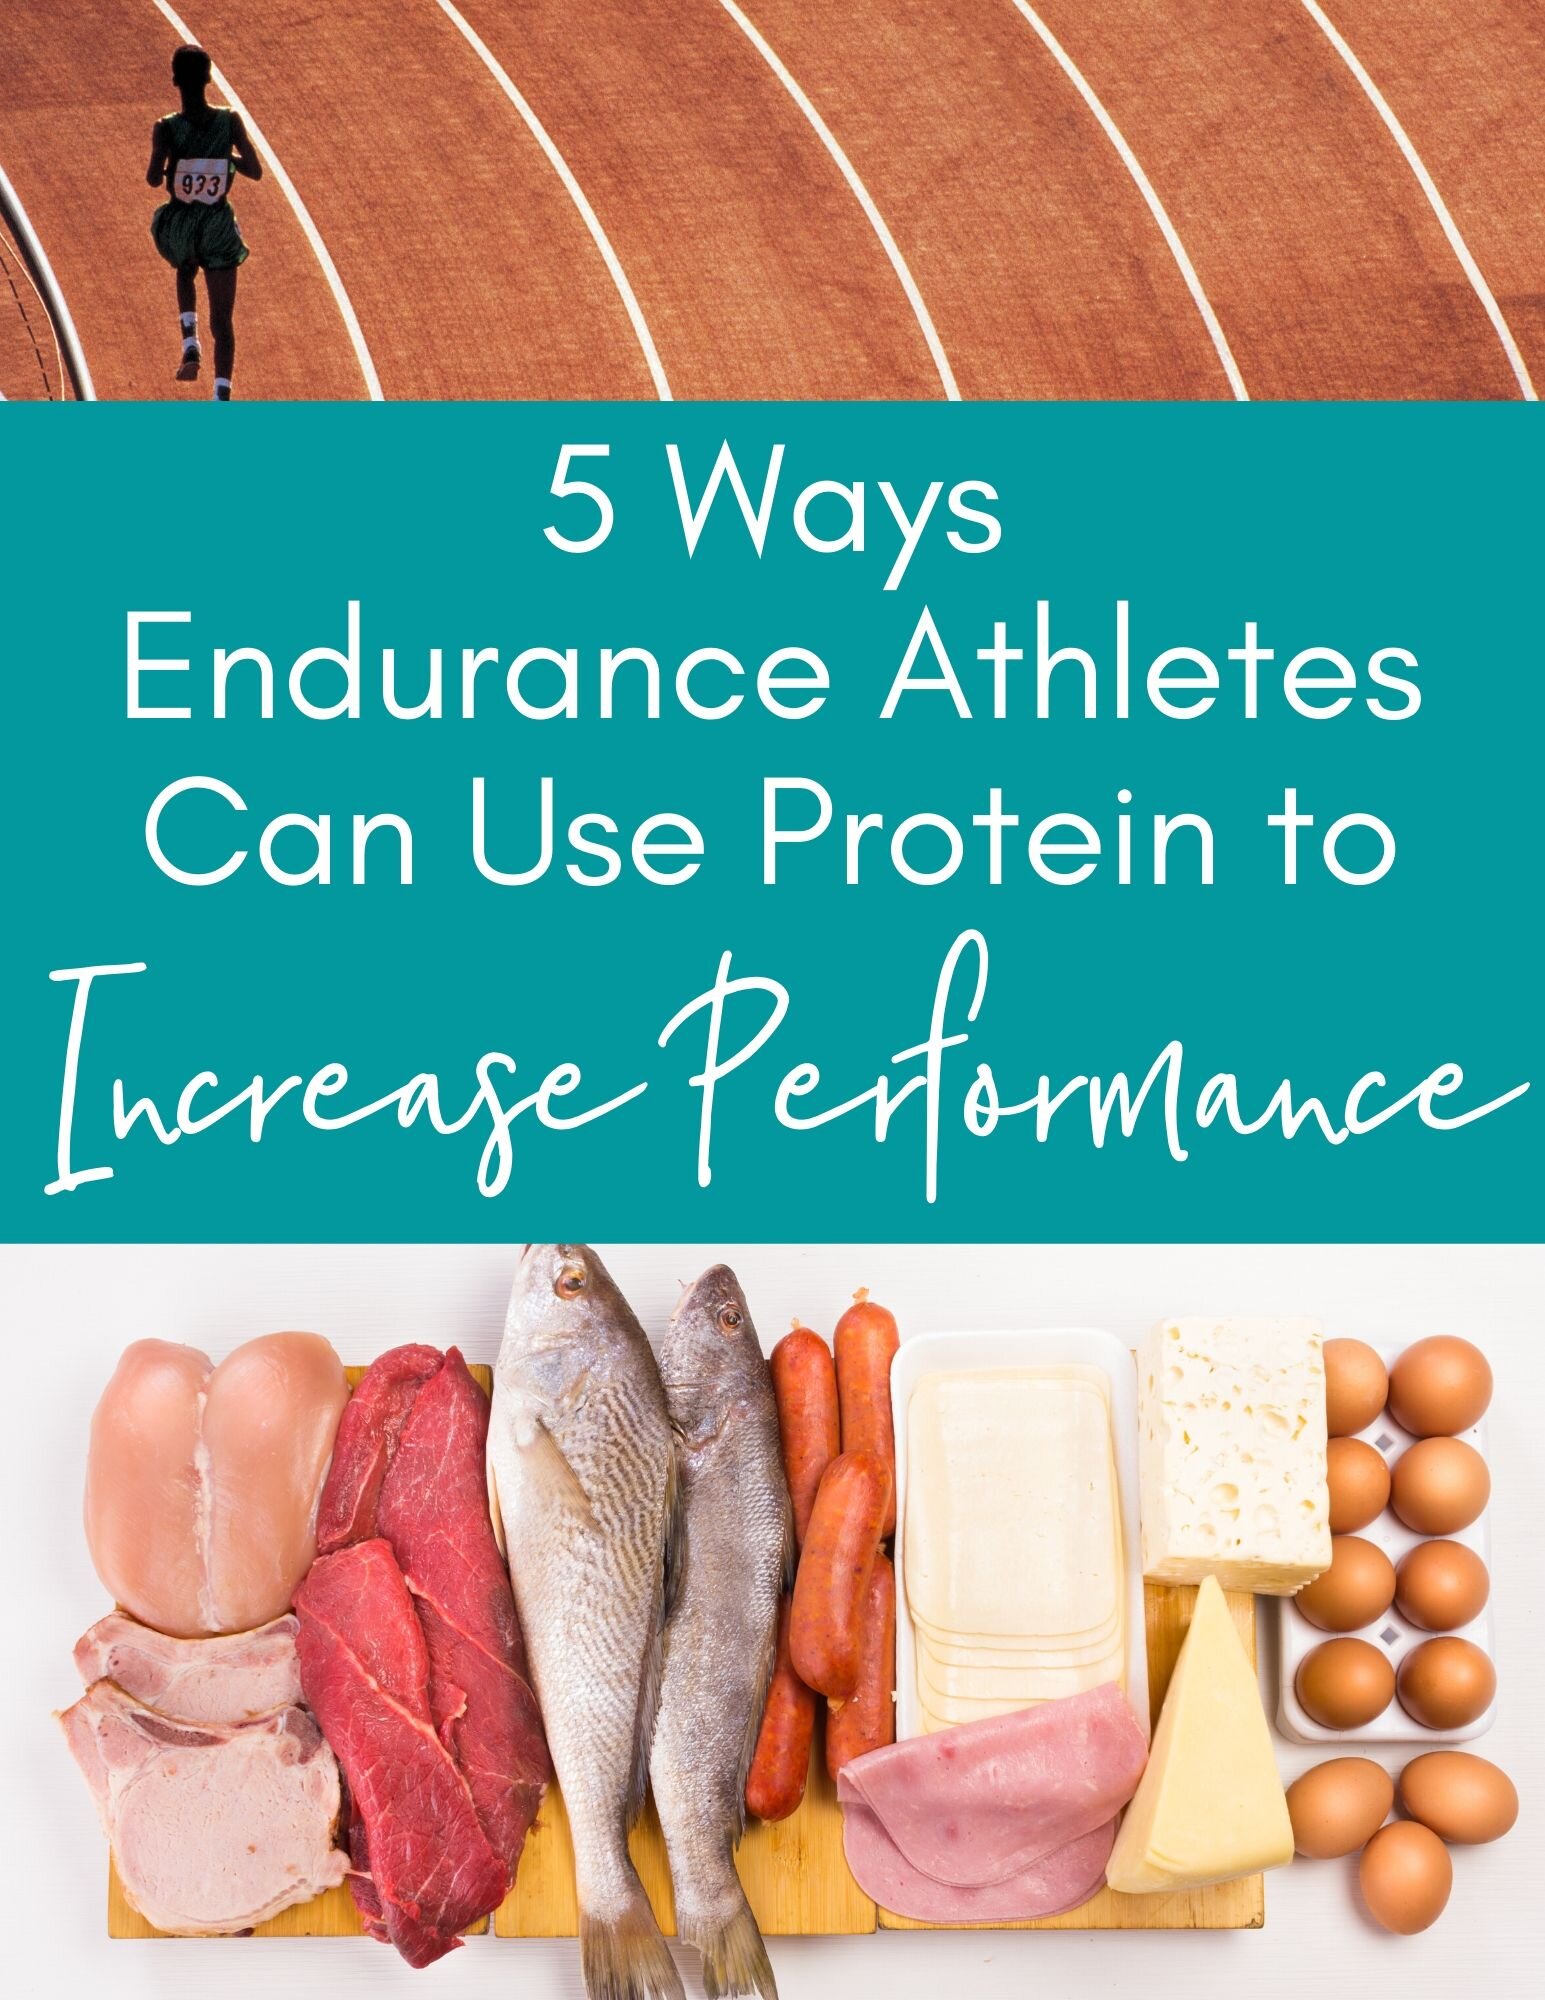 IV. Protein and Endurance: Improving Stamina and Energy